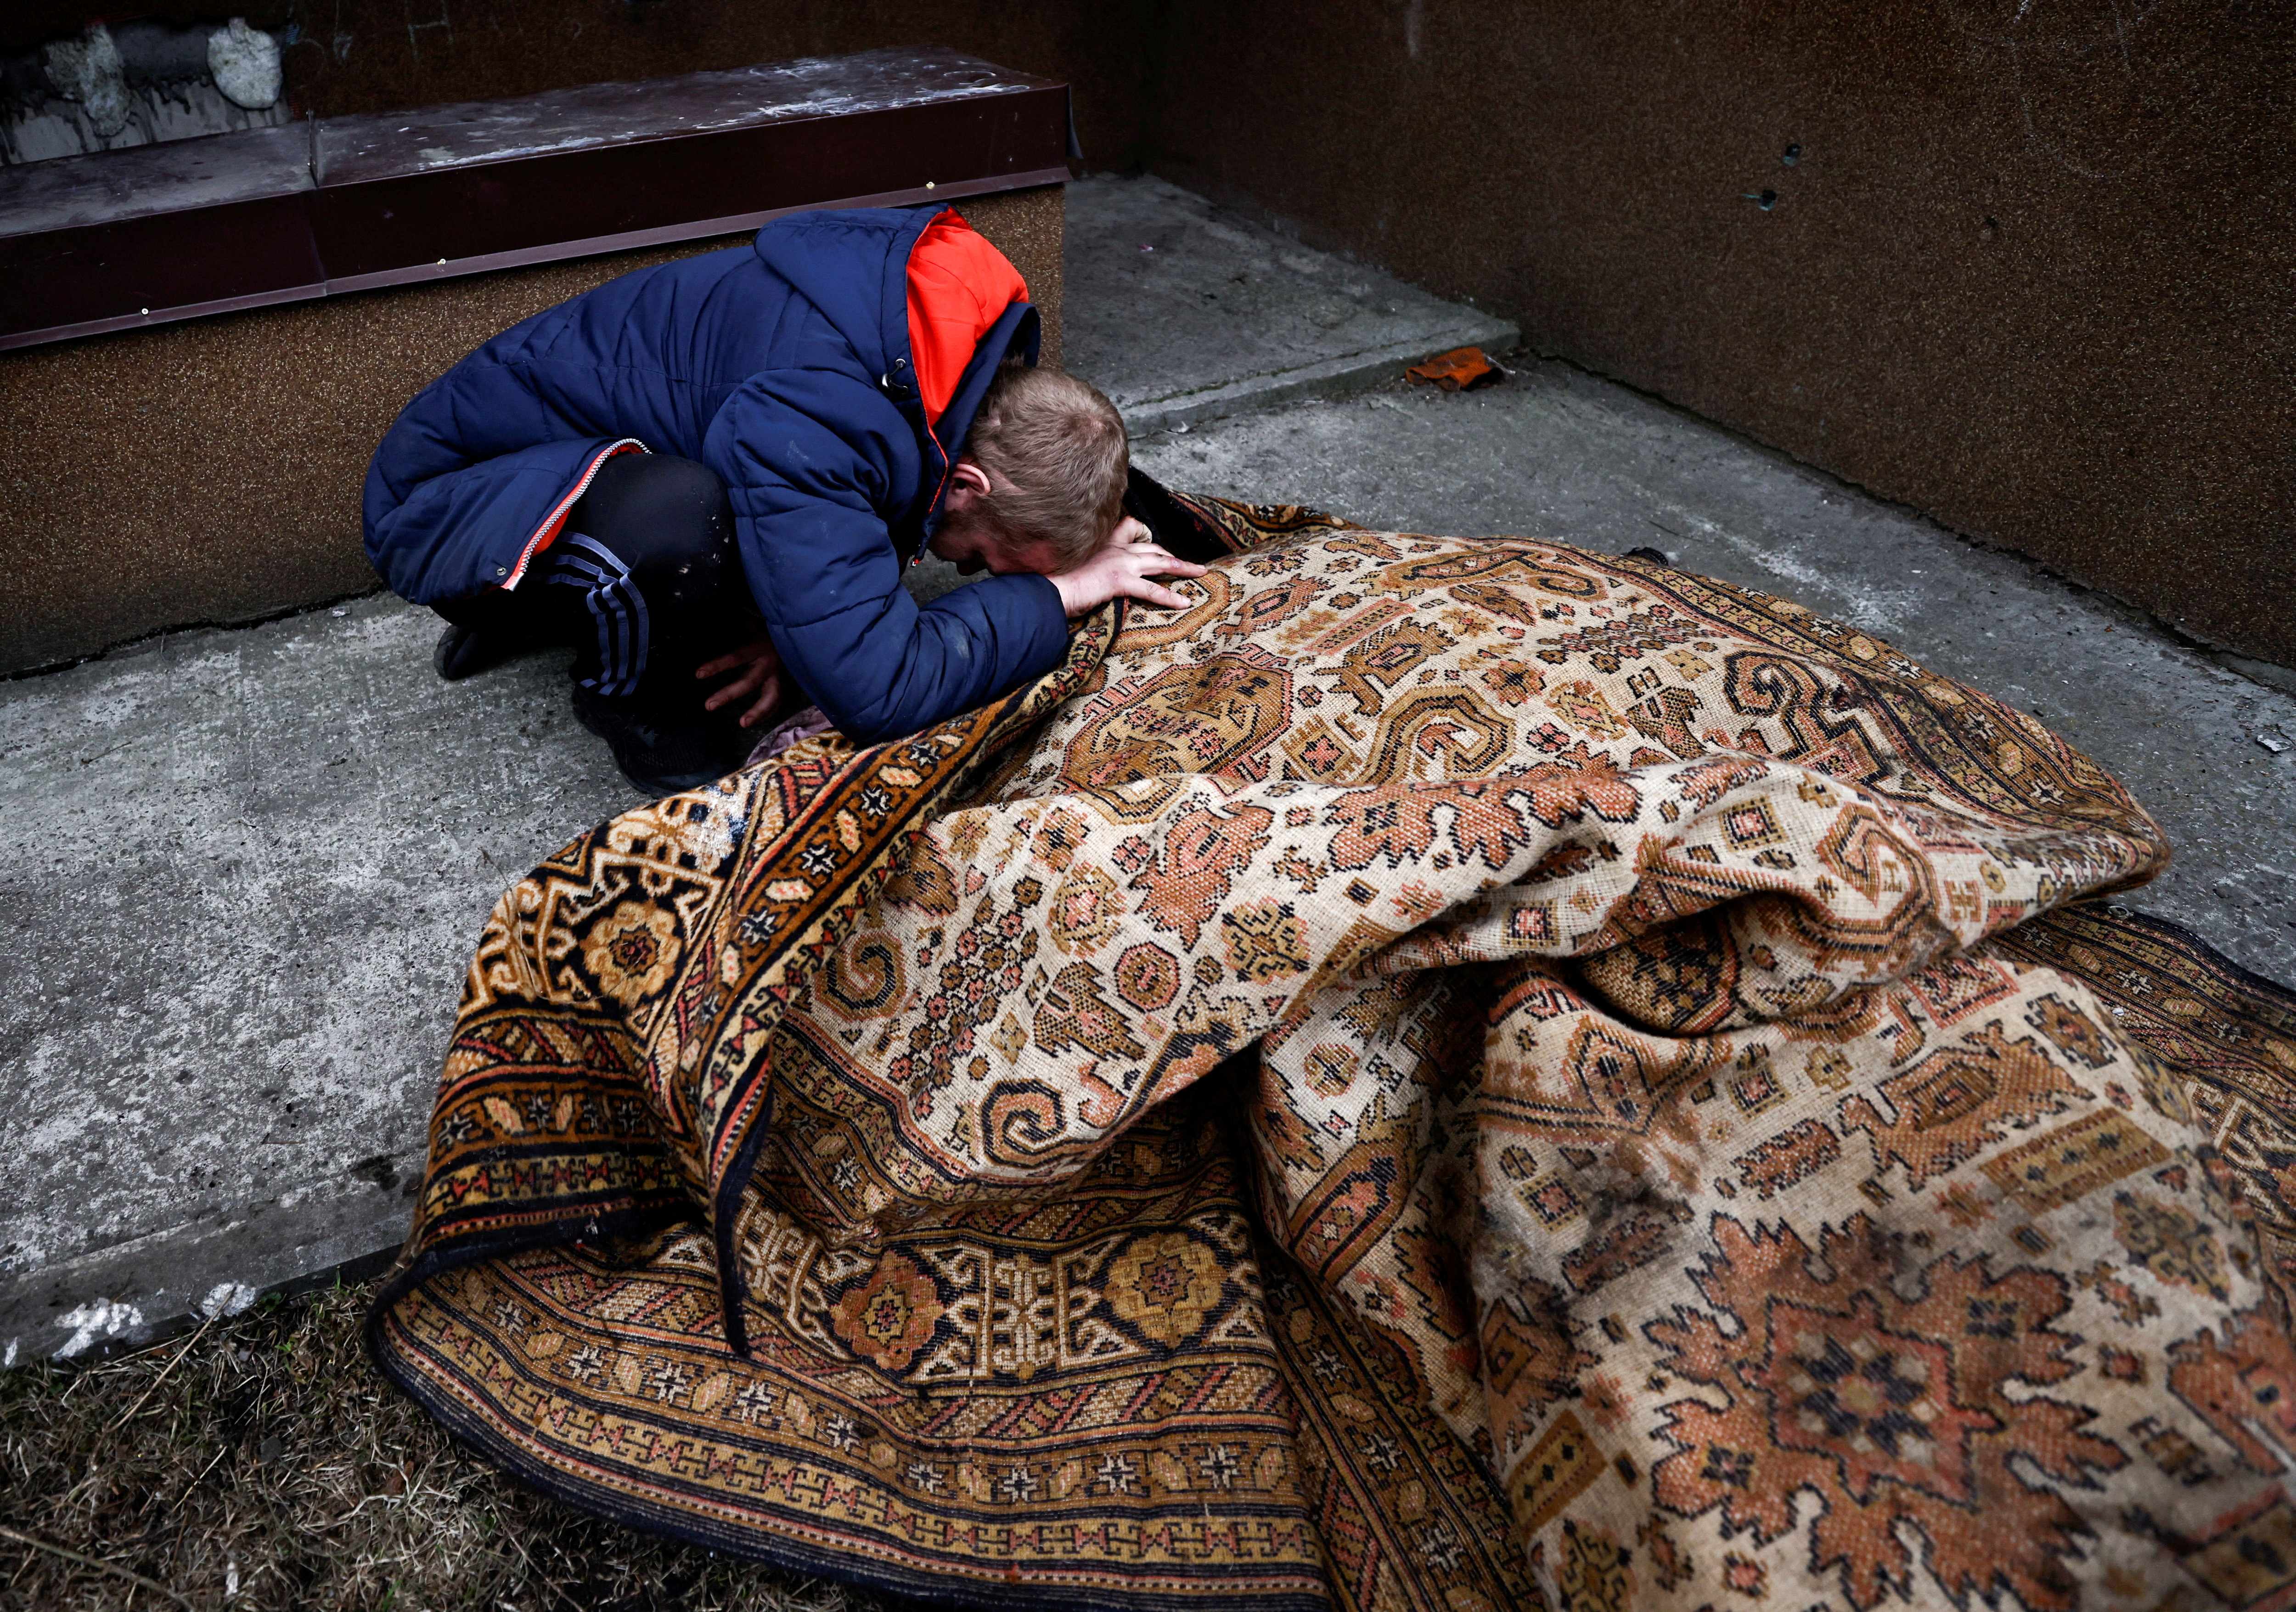 Serhii Lahovskyi mourns by the body of his friend Ihor Lytvynenko, who according to residents was killed by Russian Soldiers, in Bucha